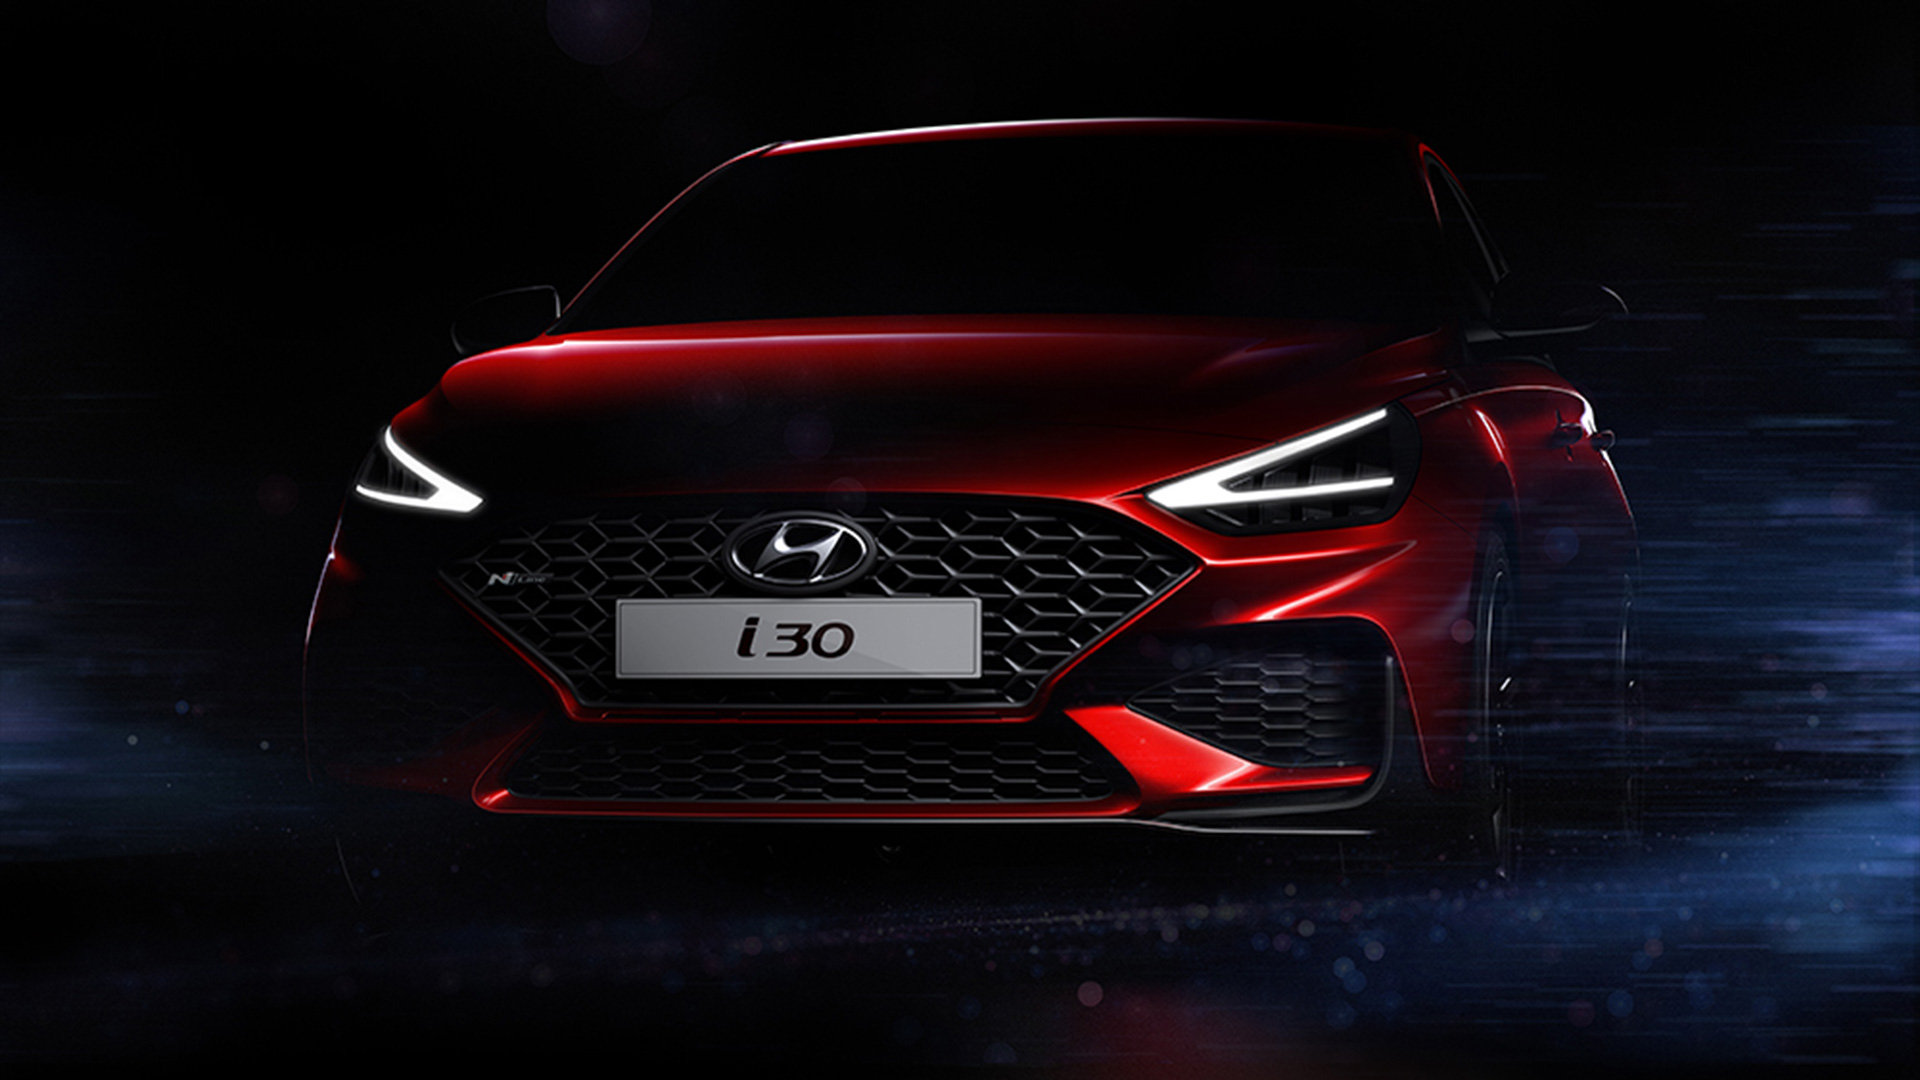 Hyundai Motor gives a first glimpse of new i30